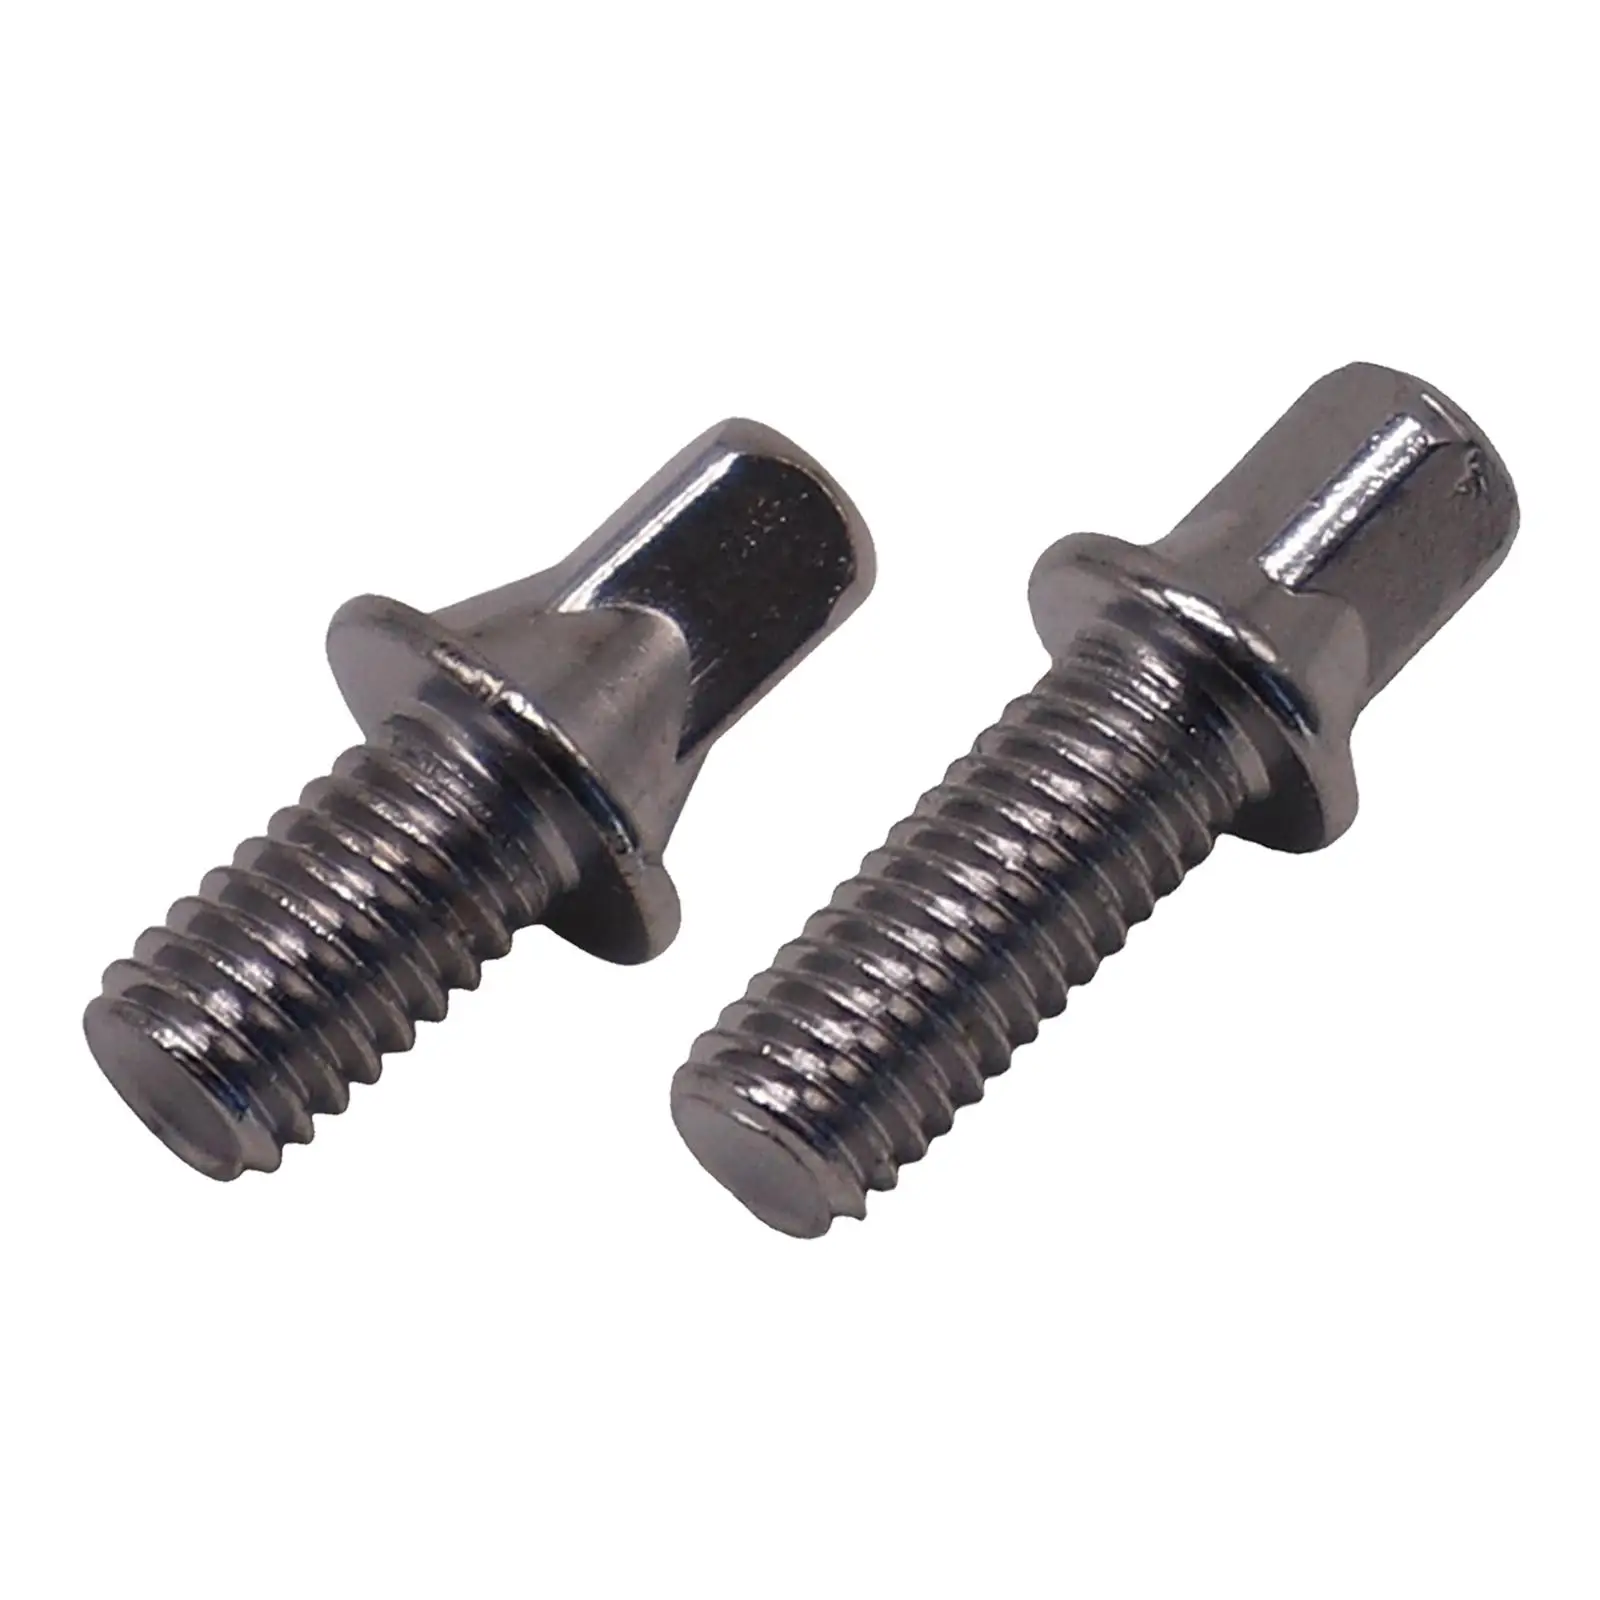 10x Drum Tension Rods Smooth Deep Thread Strong Rustproof Metal Percussion Hardware Short Screws for Snare Drum Drum Parts